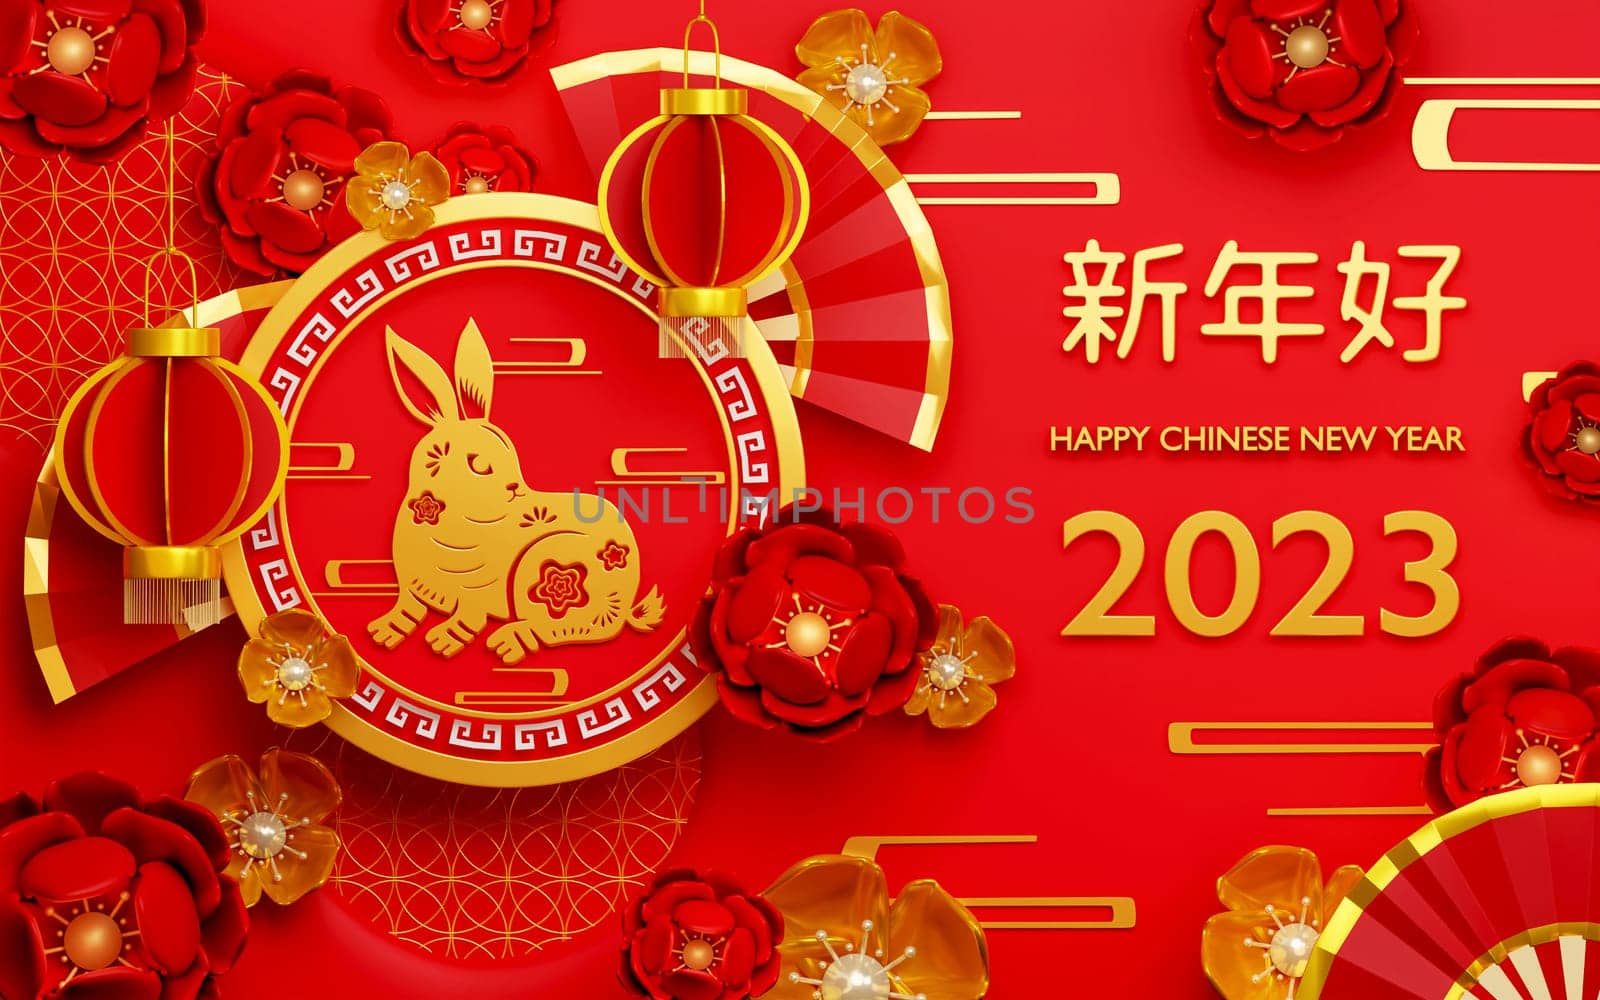 2023 Happy Chinese New Year greeting card, Character Fu text translation, lunar spring festival decorations. rabbit zodiac banner, 3d render illustration with lanterns, clouds.